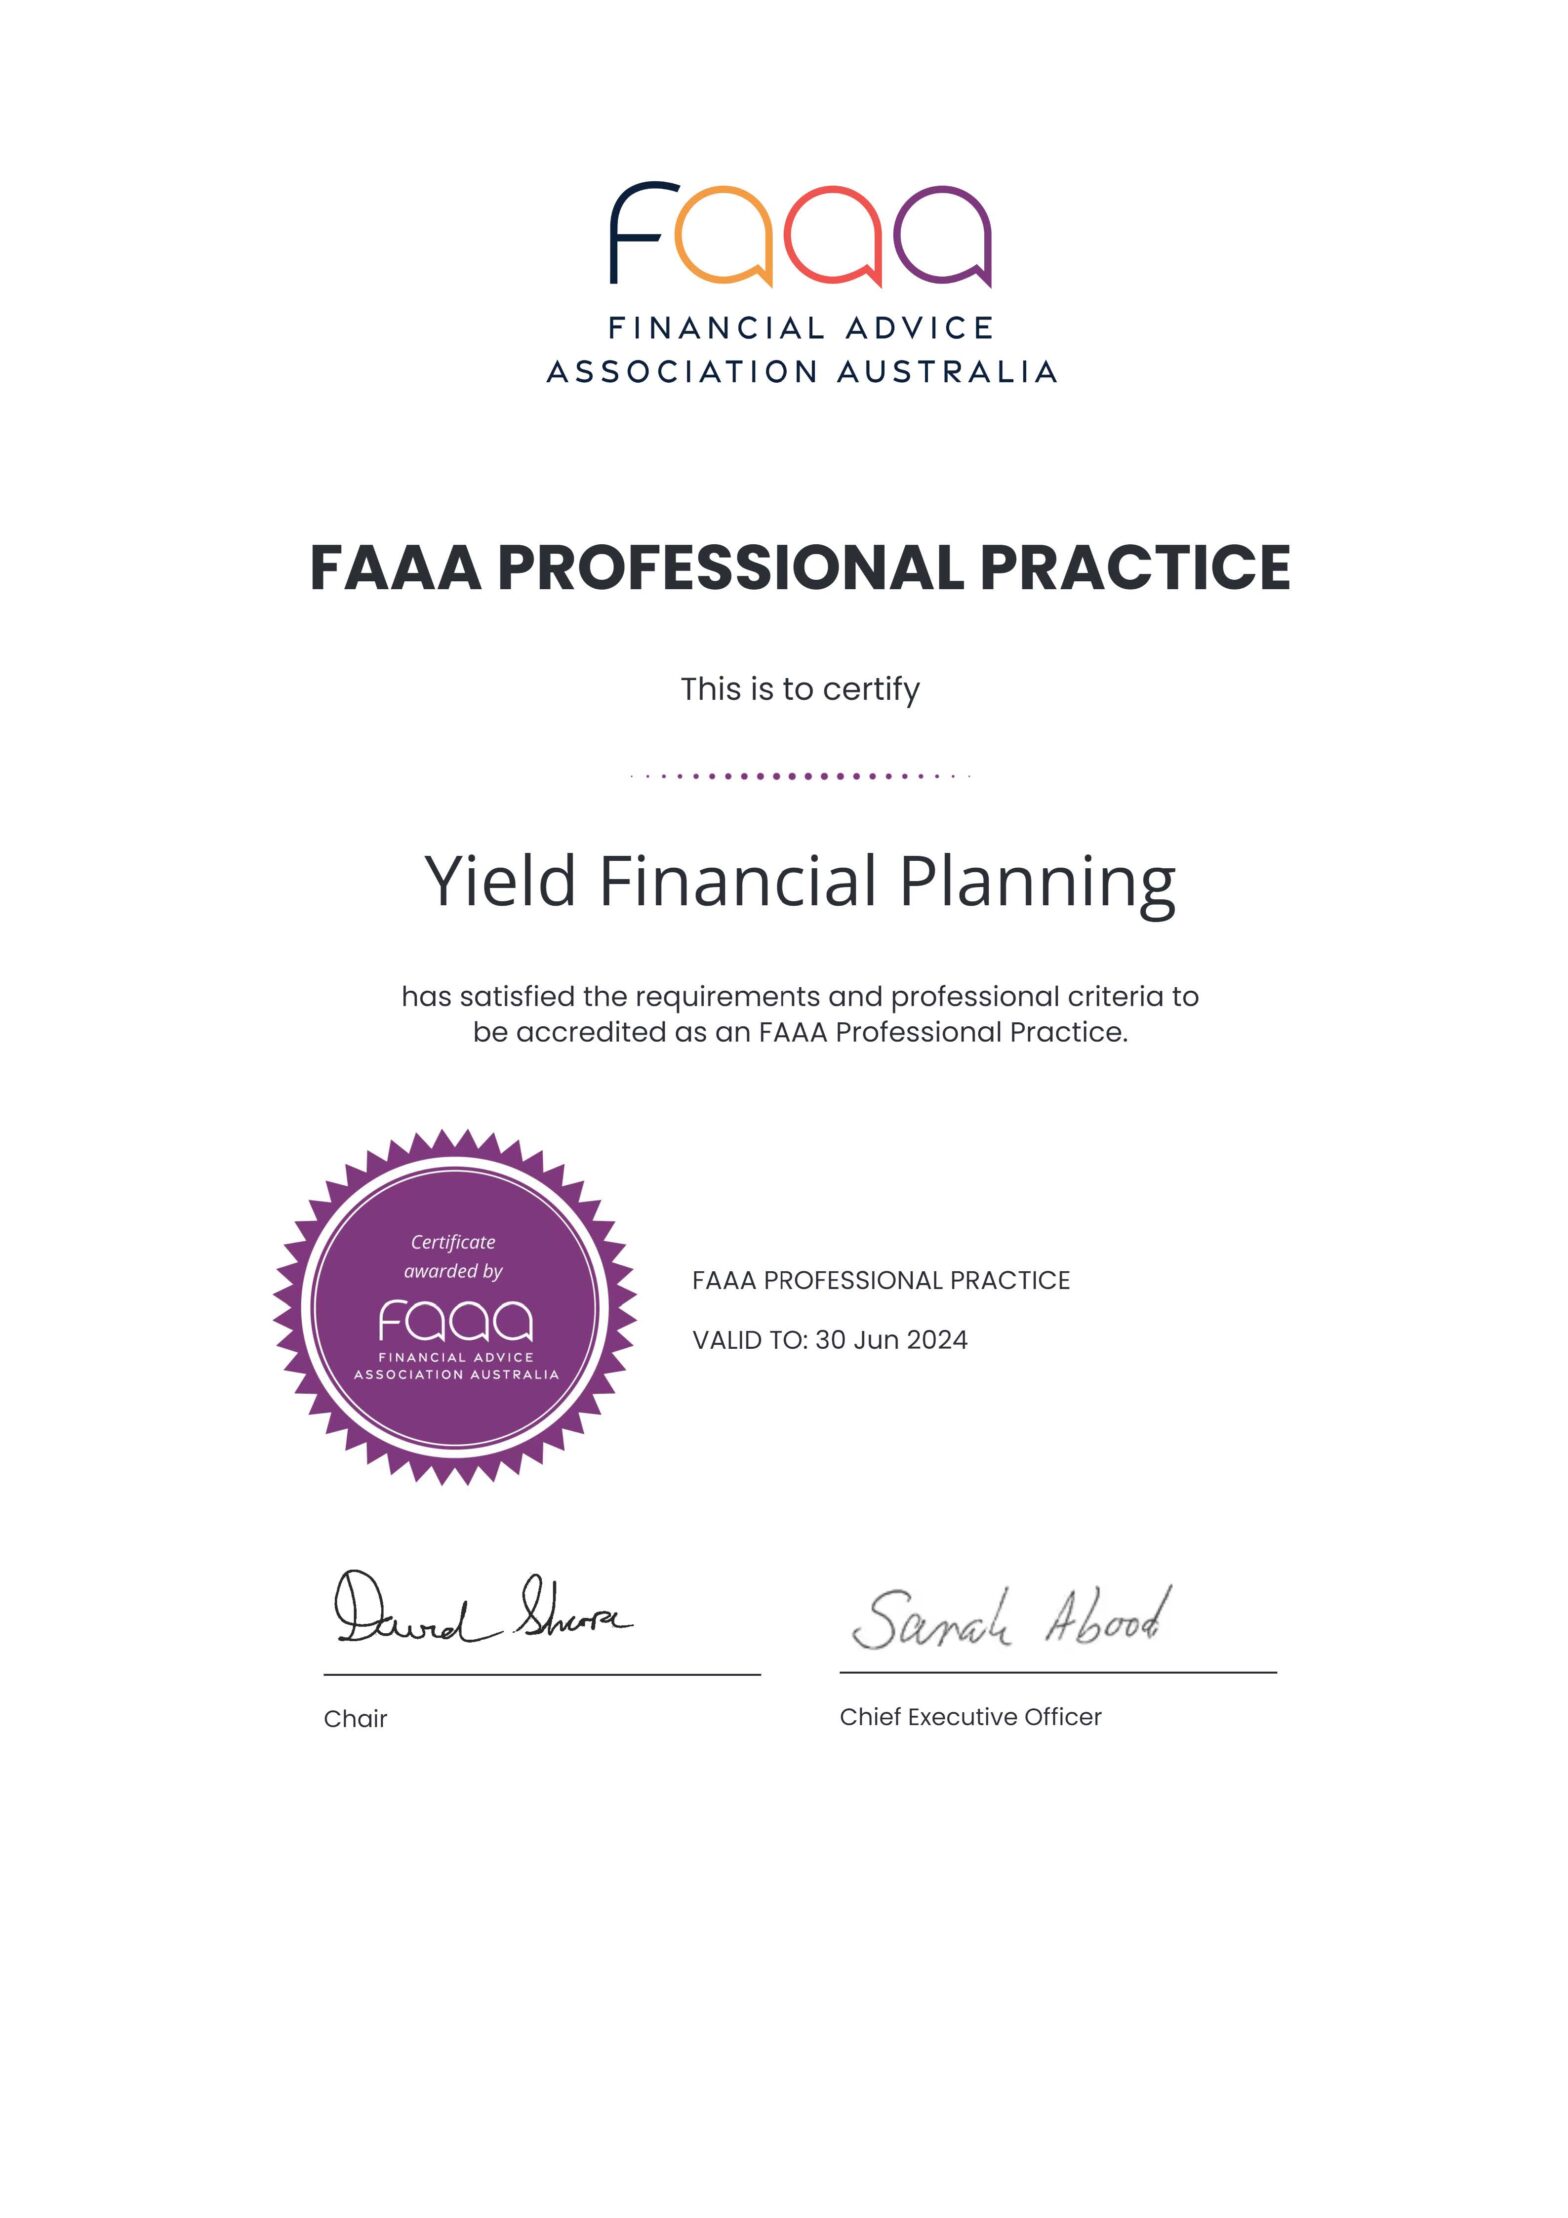 Yield Financial Planning is an FAAA approved practice